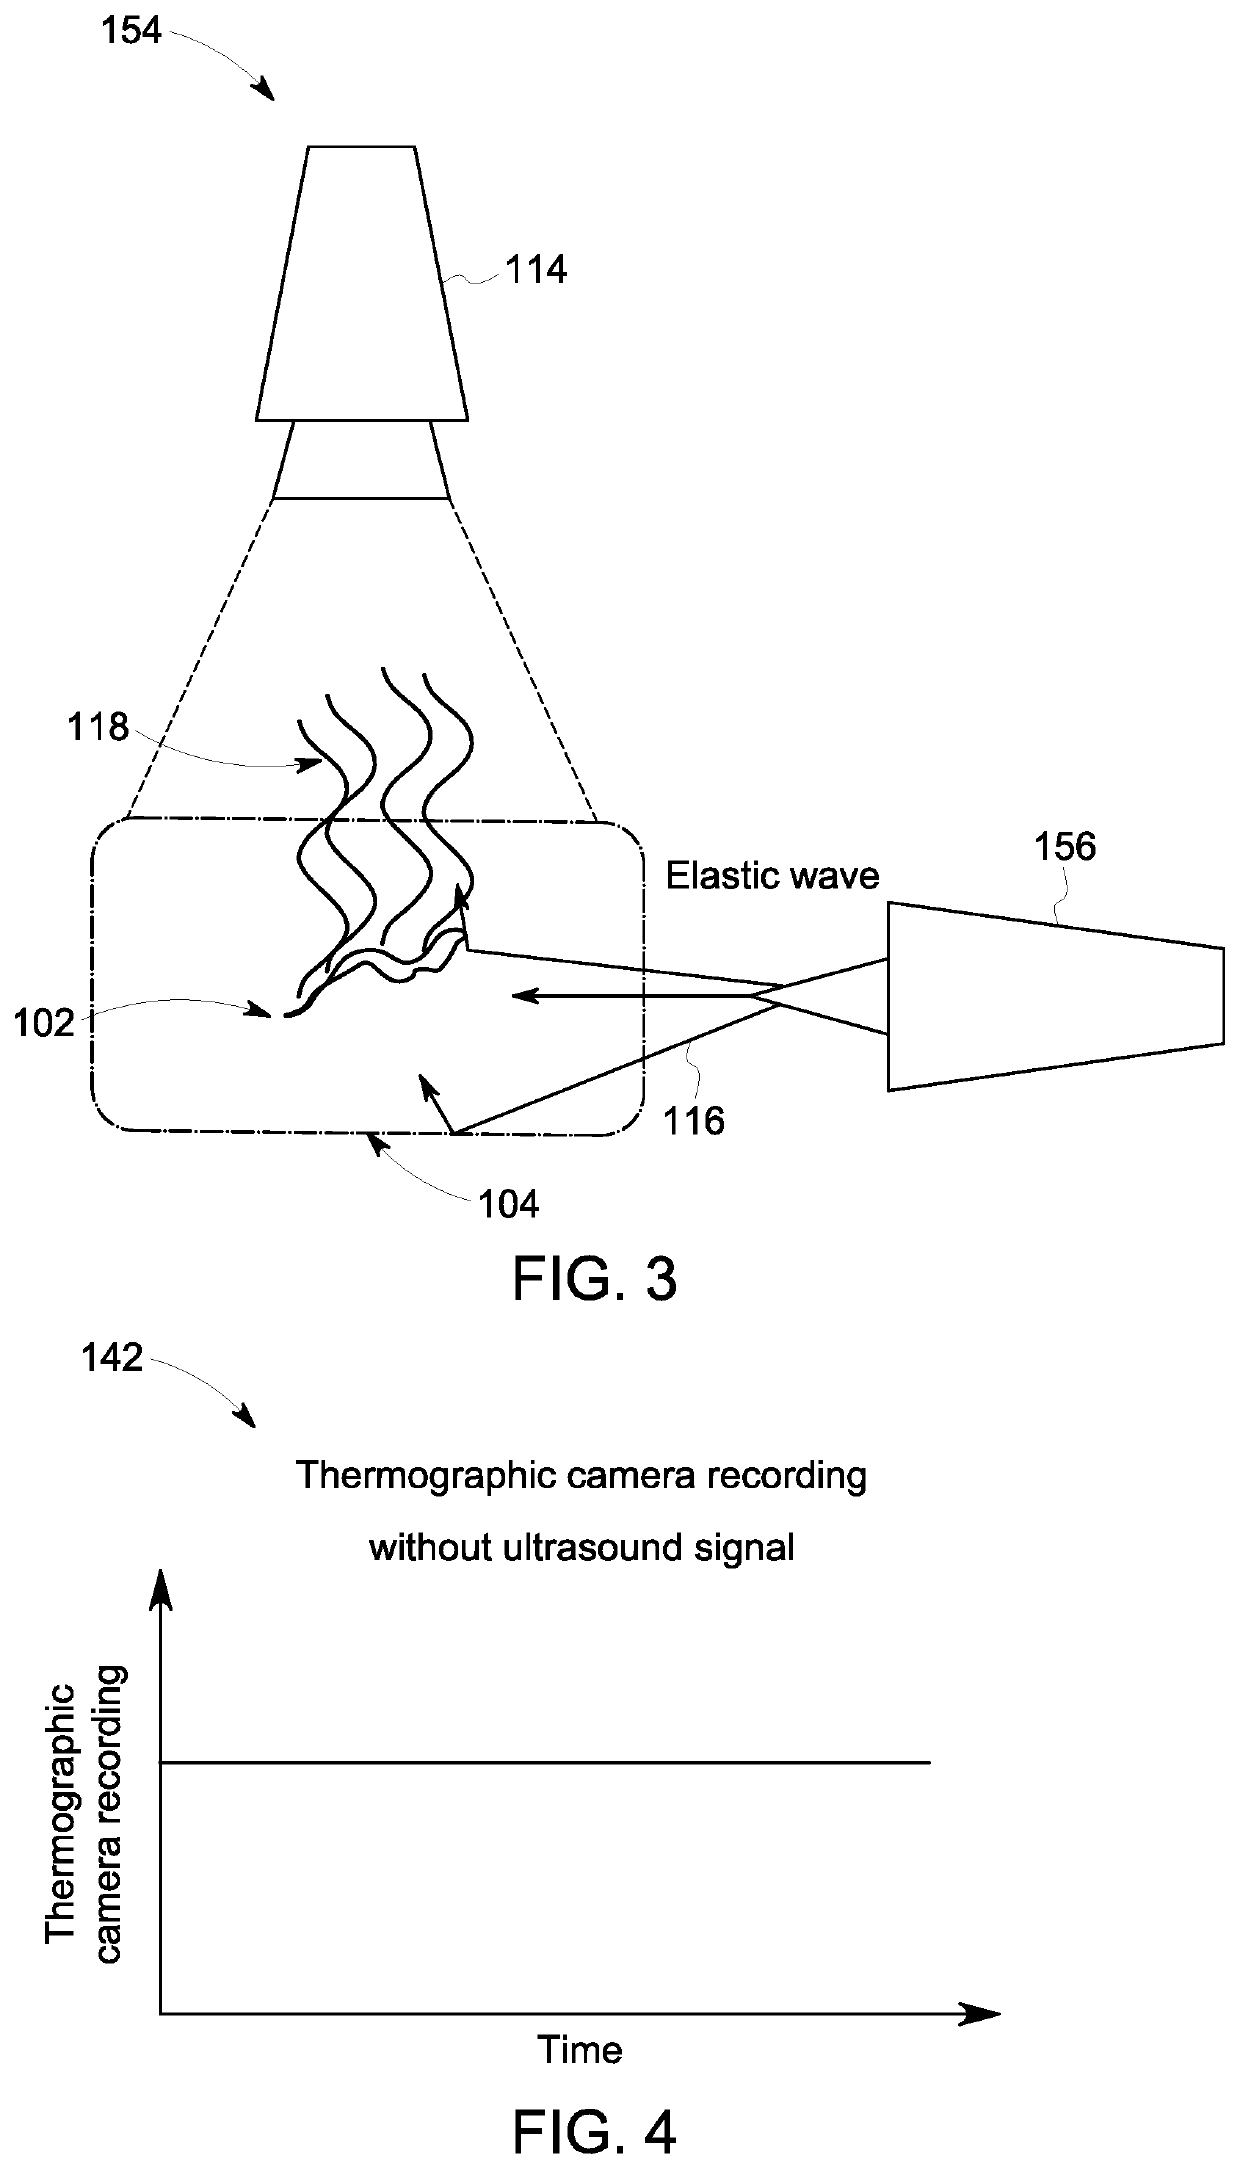 Thermographic inspection system mounted on motorized apparatus and methods of using same